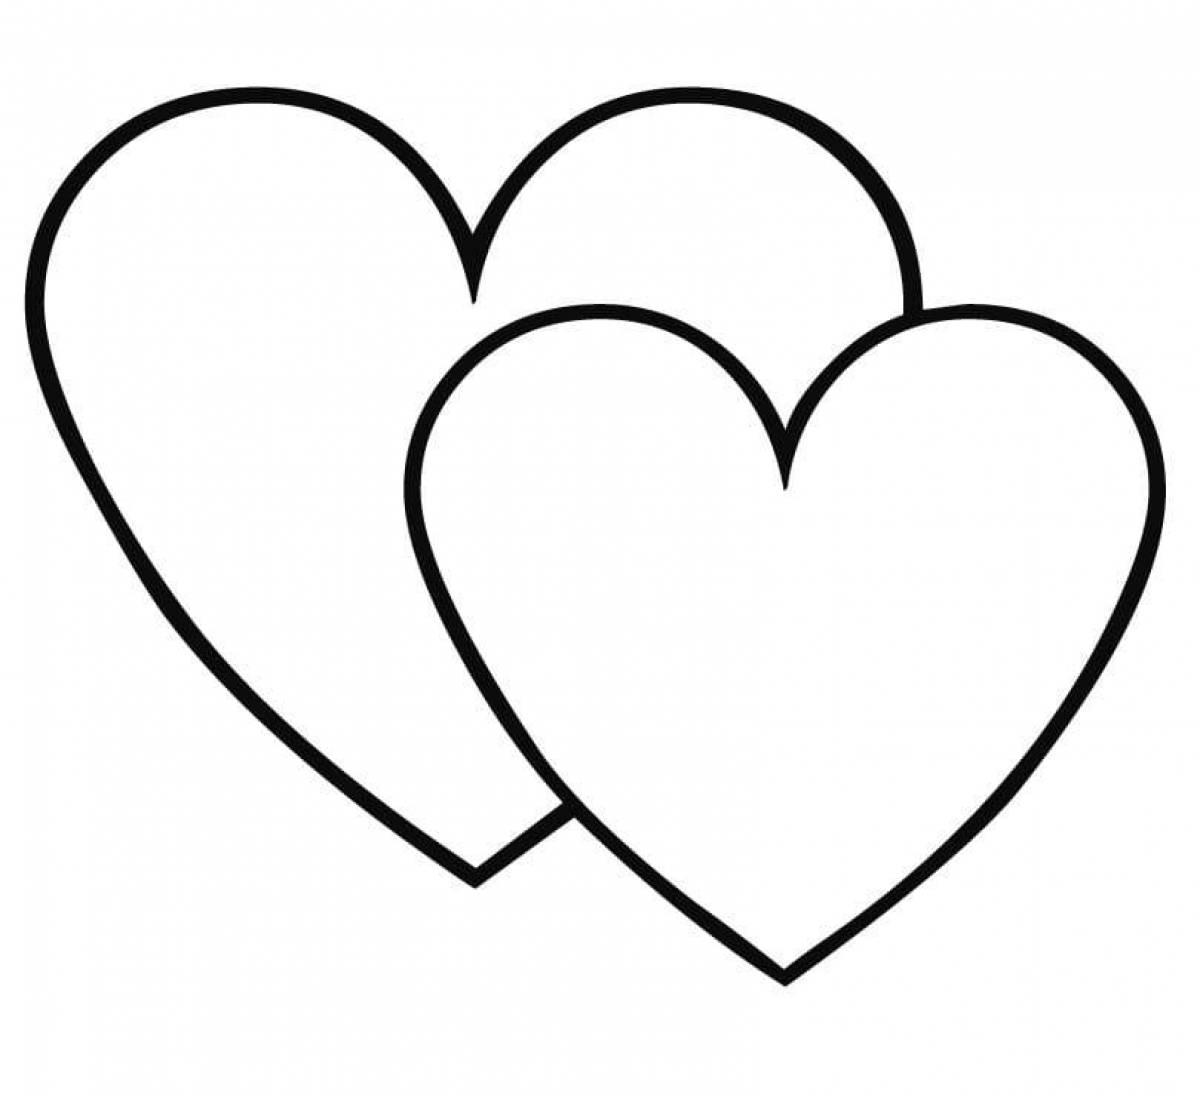 Colored heart coloring page